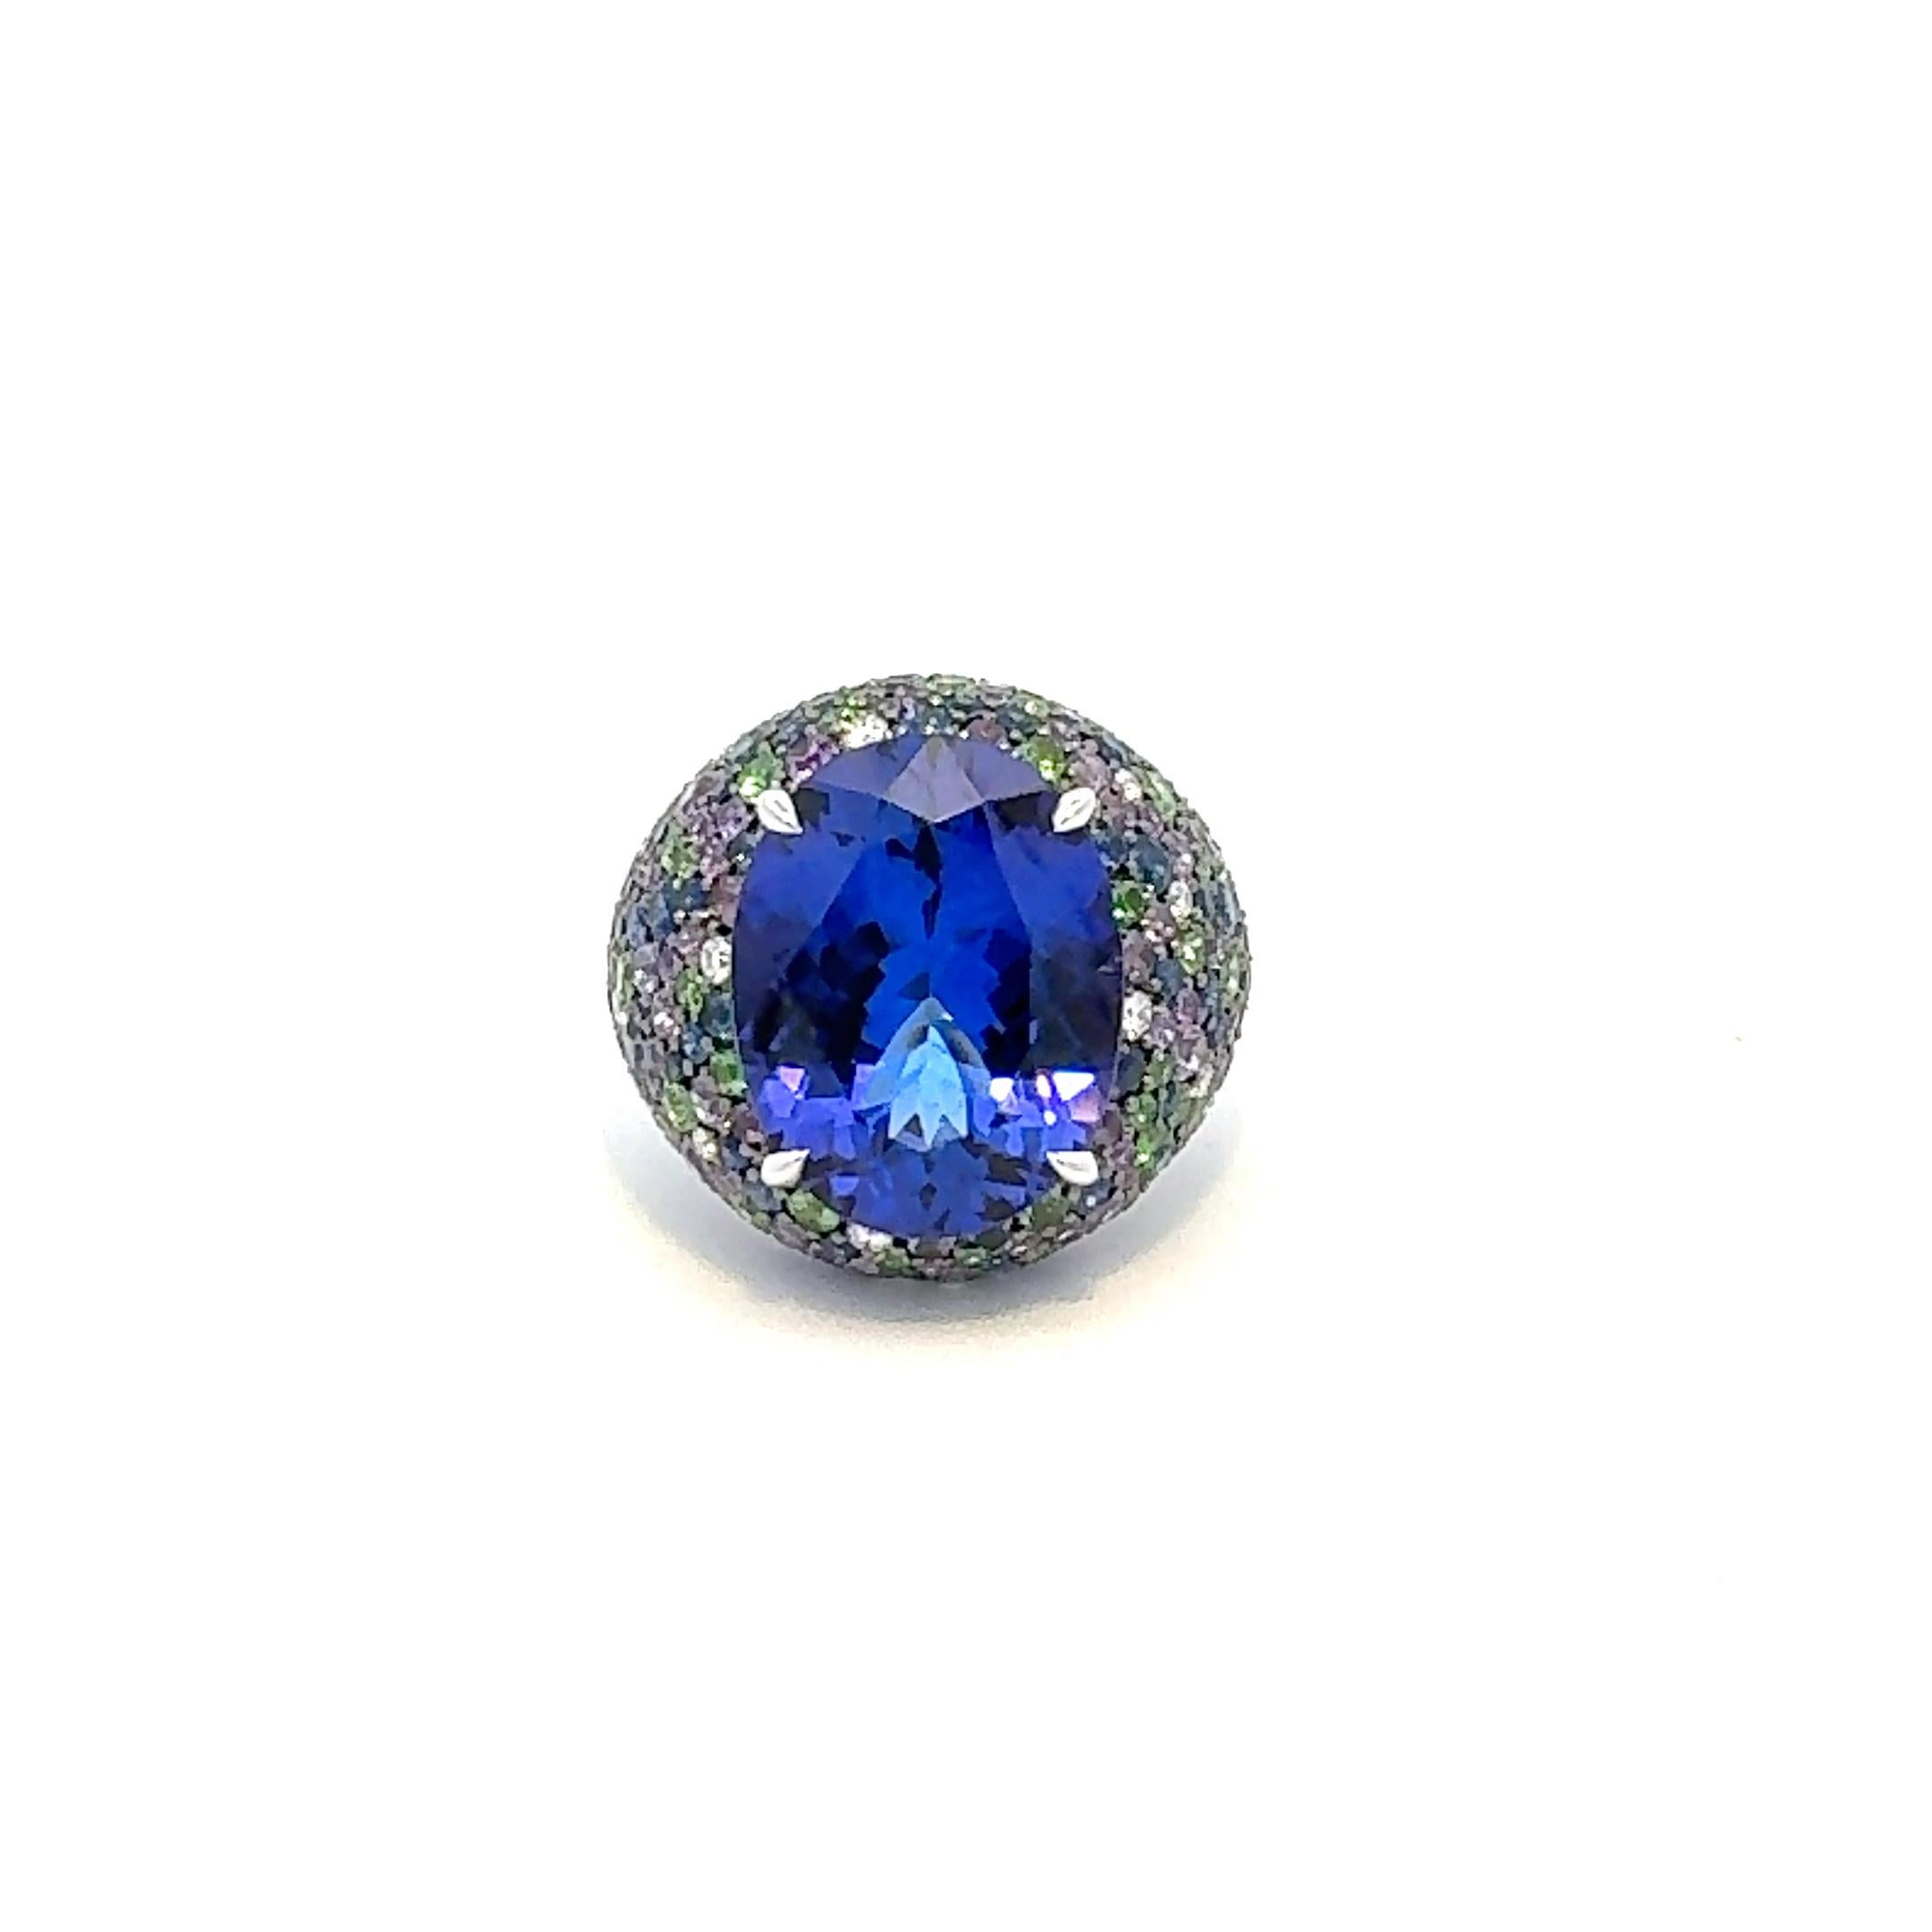 Stunning Sapphire Tanzanite Diamond 18K White Gold Ring For Her For Sale 2